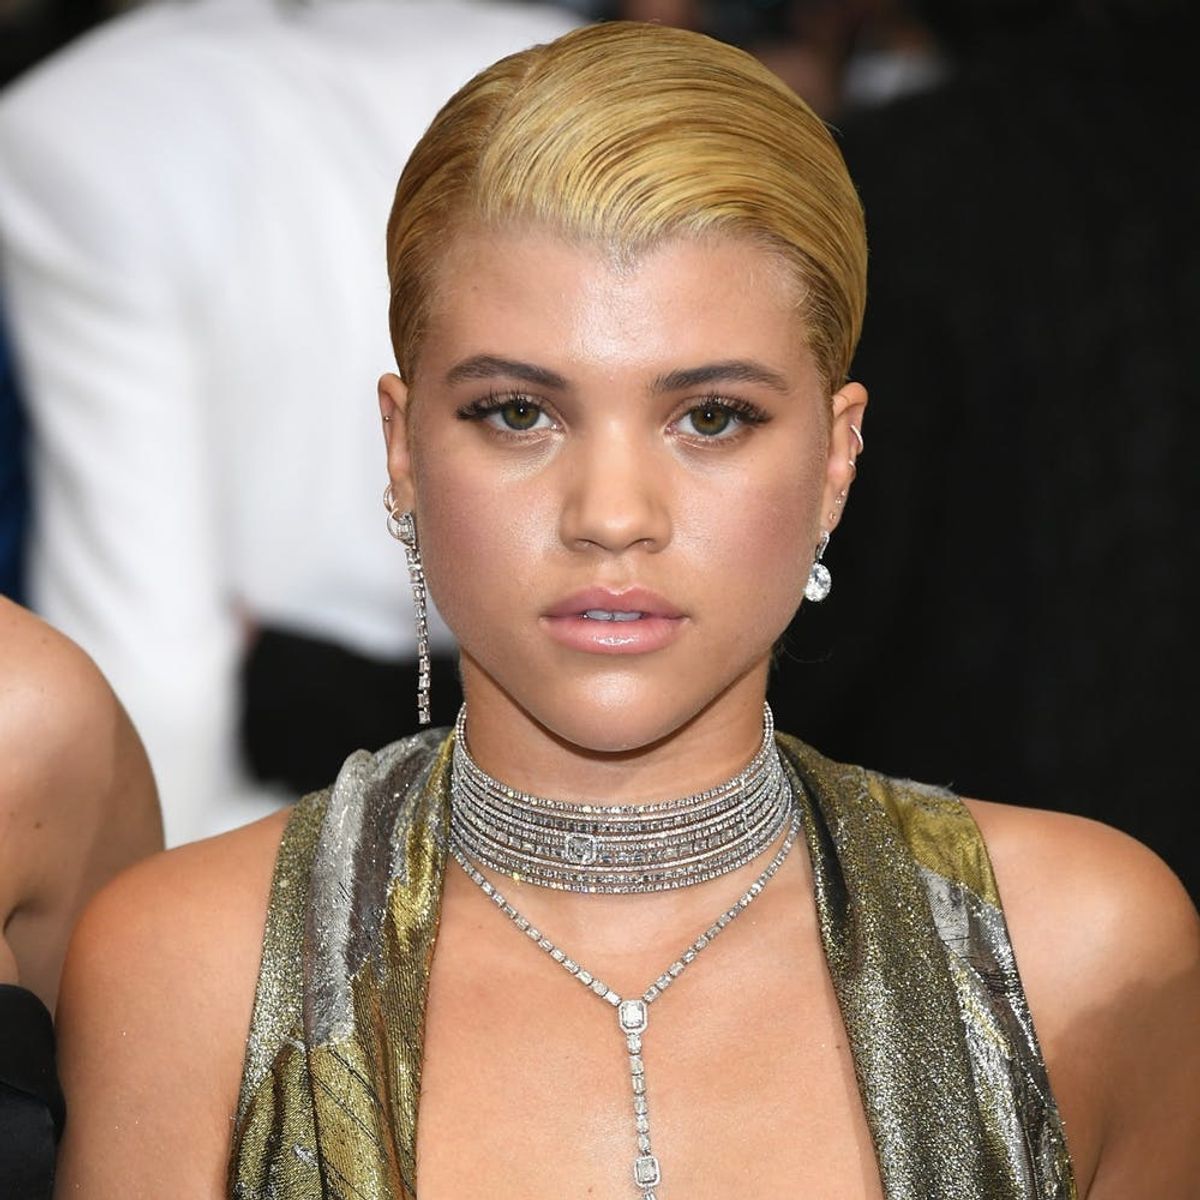 Sofia Richie Just Made Things Instagram Official With Scott Disick